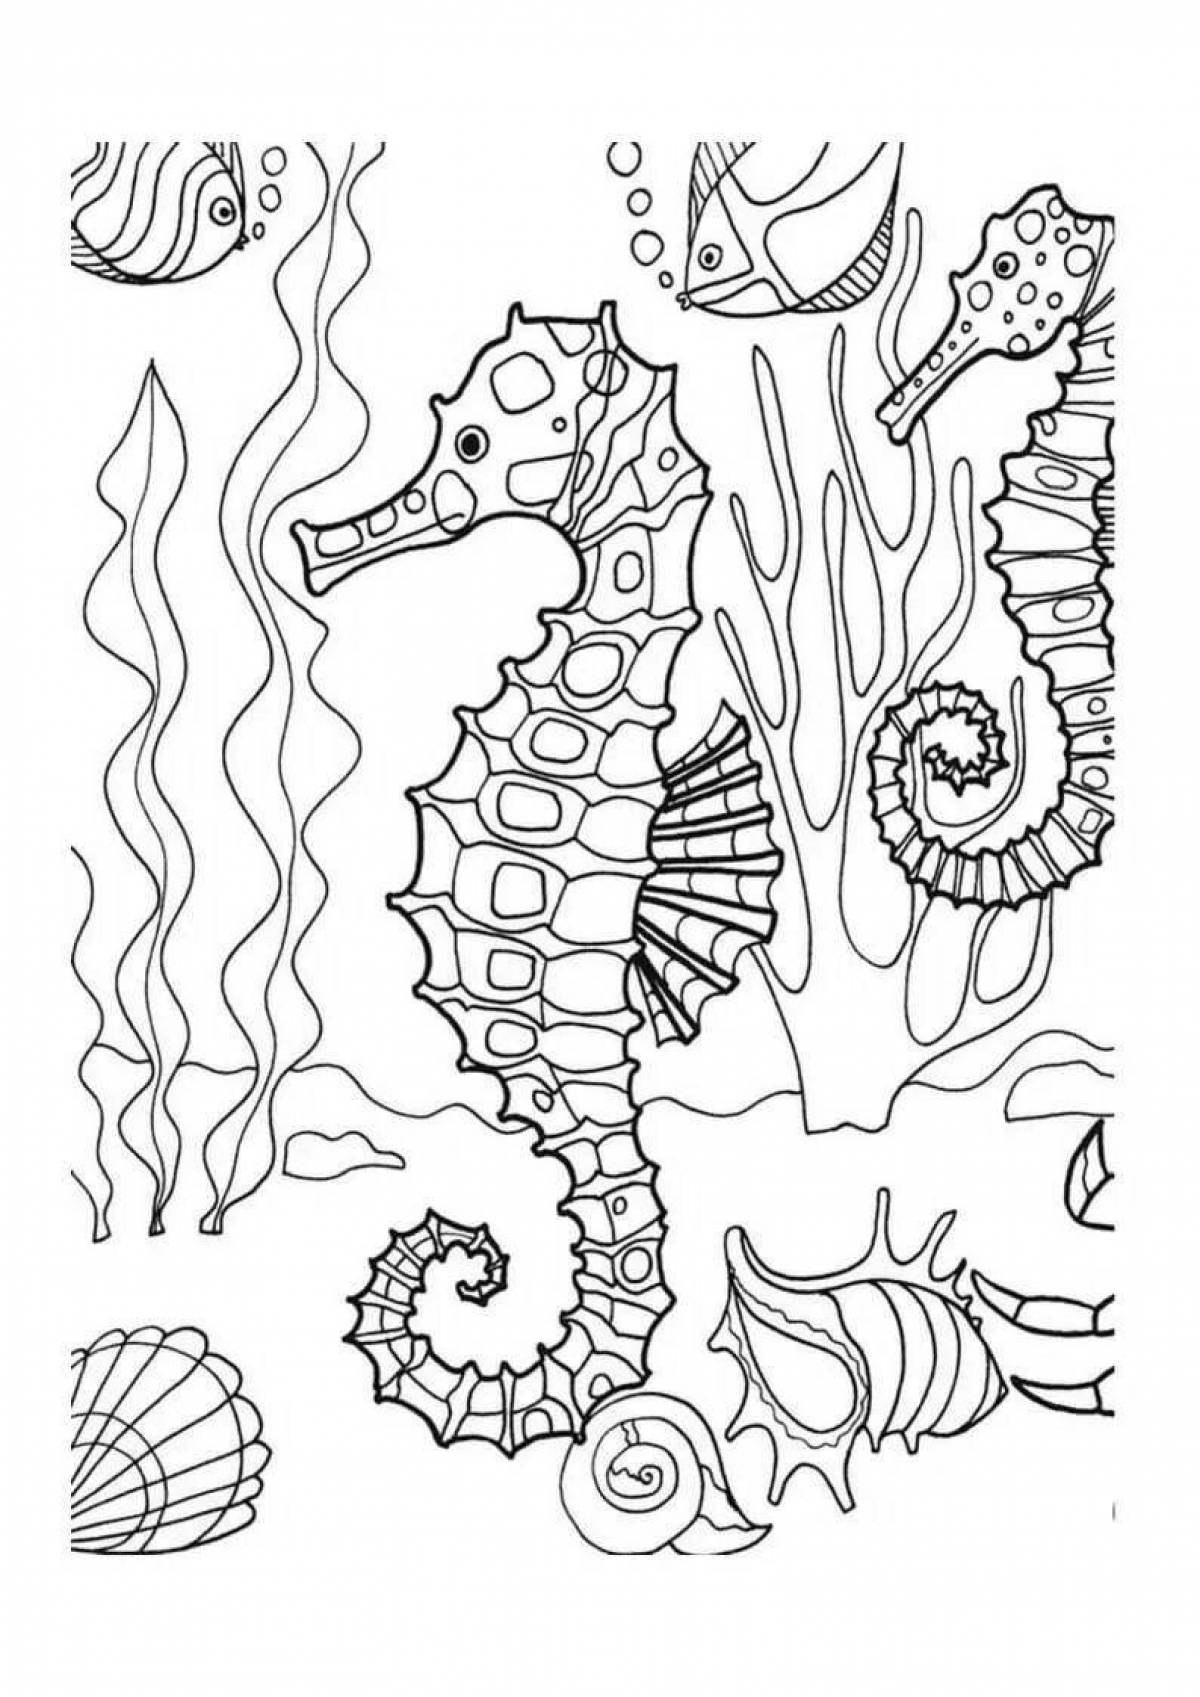 Animated seahorse coloring page for kids